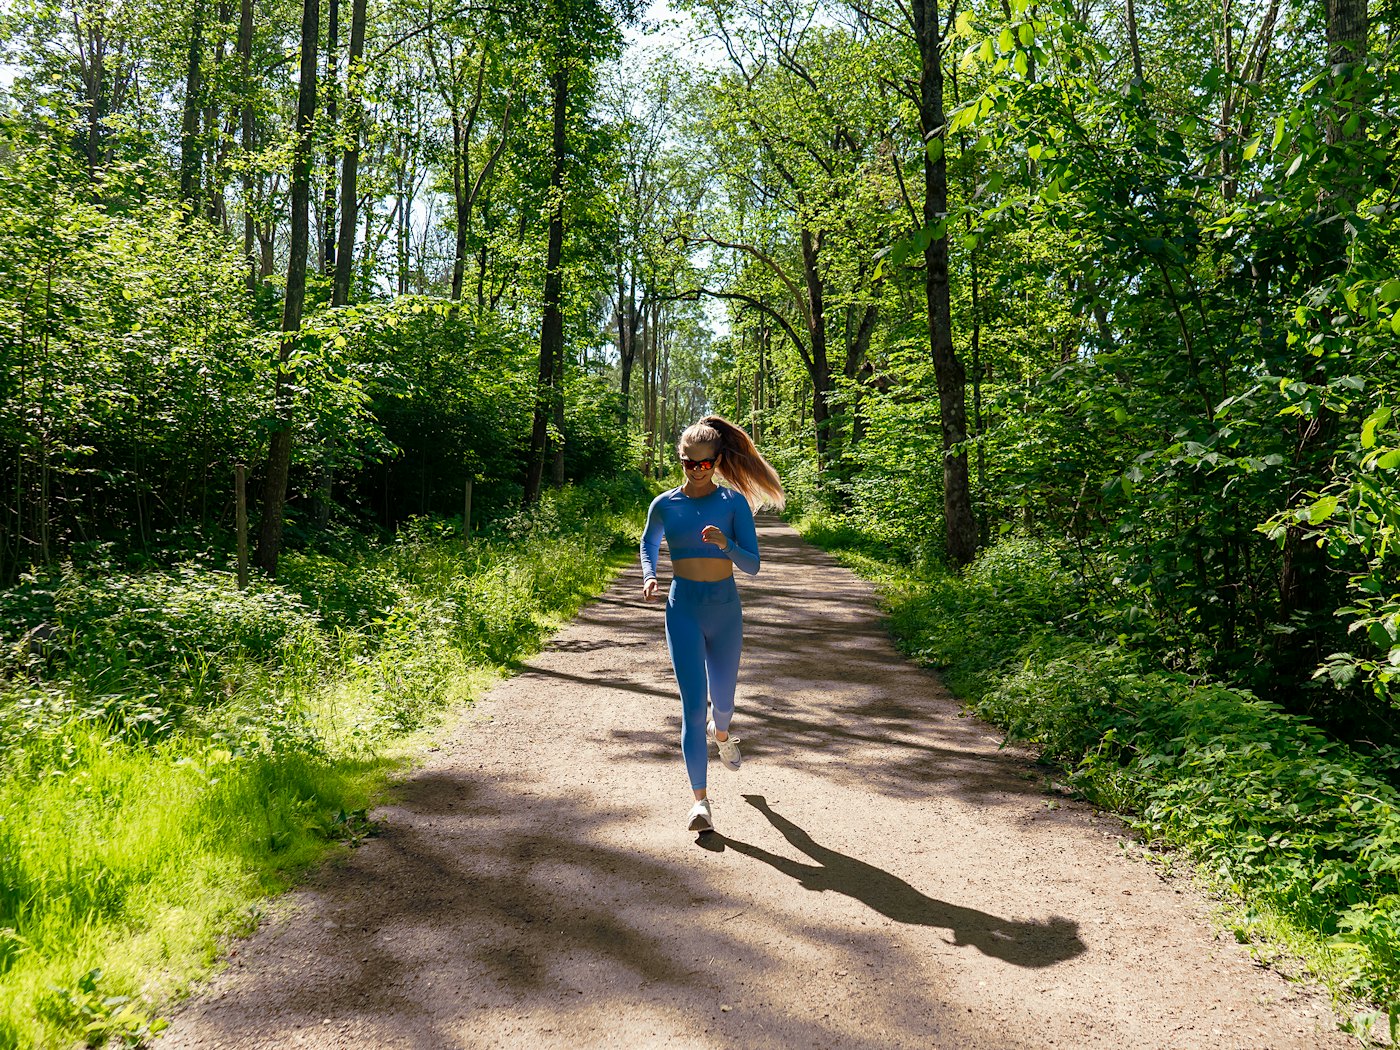 Lady in blue jogging along the footpath in the forest by Bogstadvannet